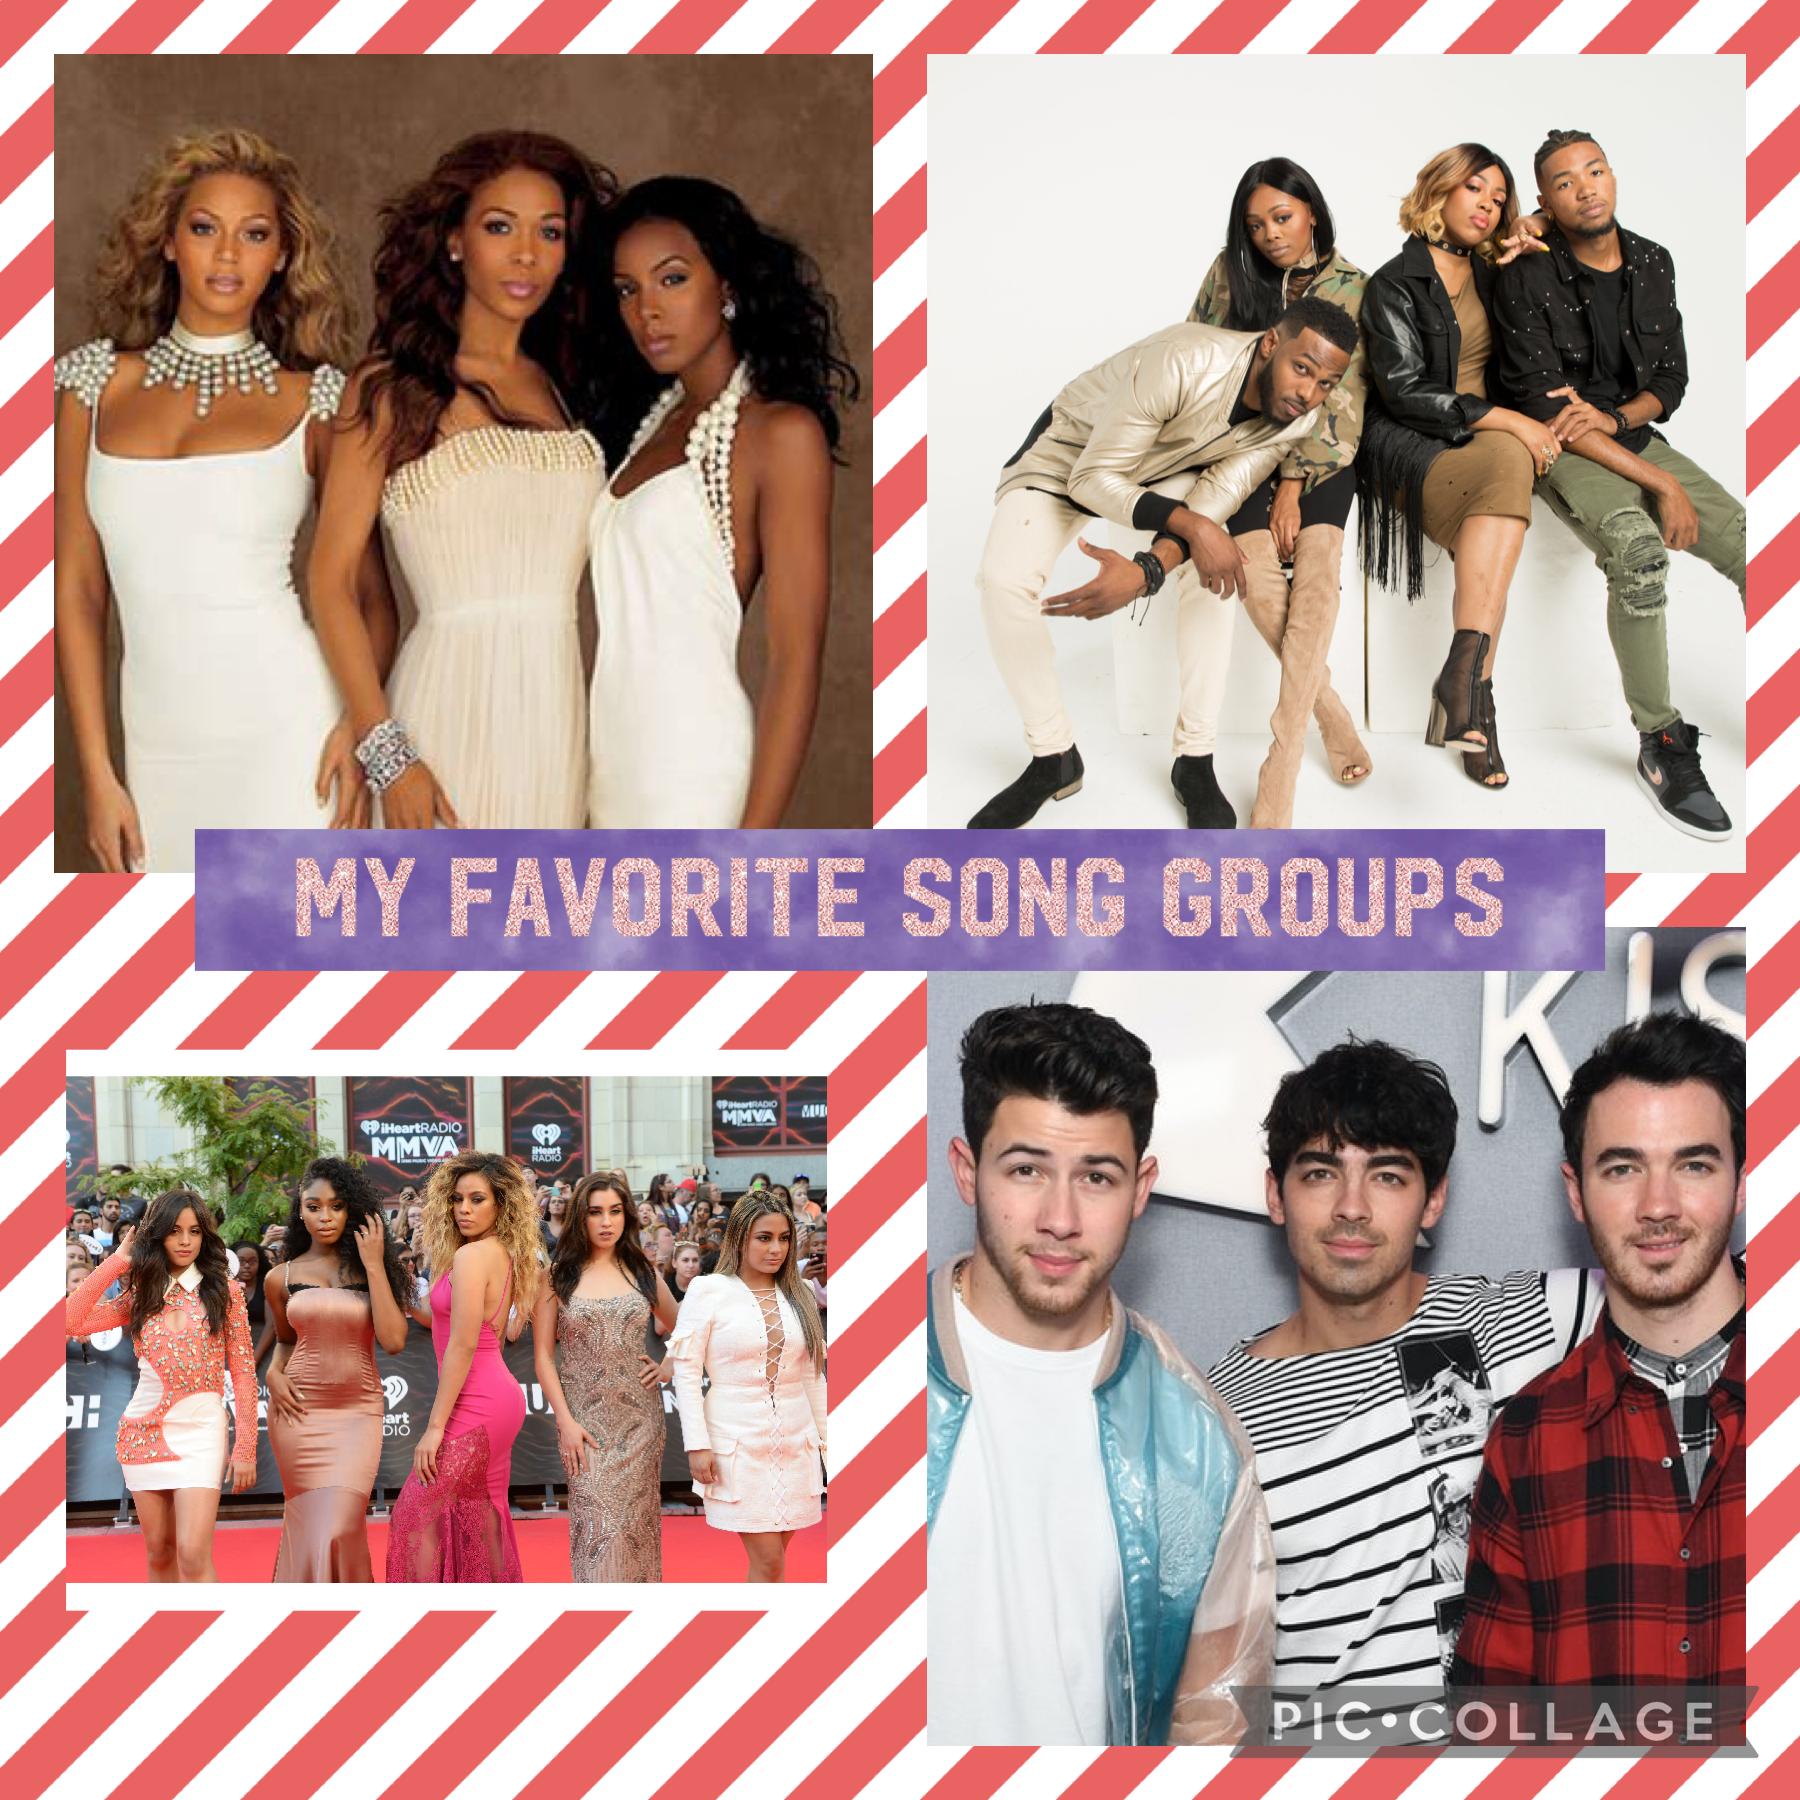 My favorite song groups 🎤